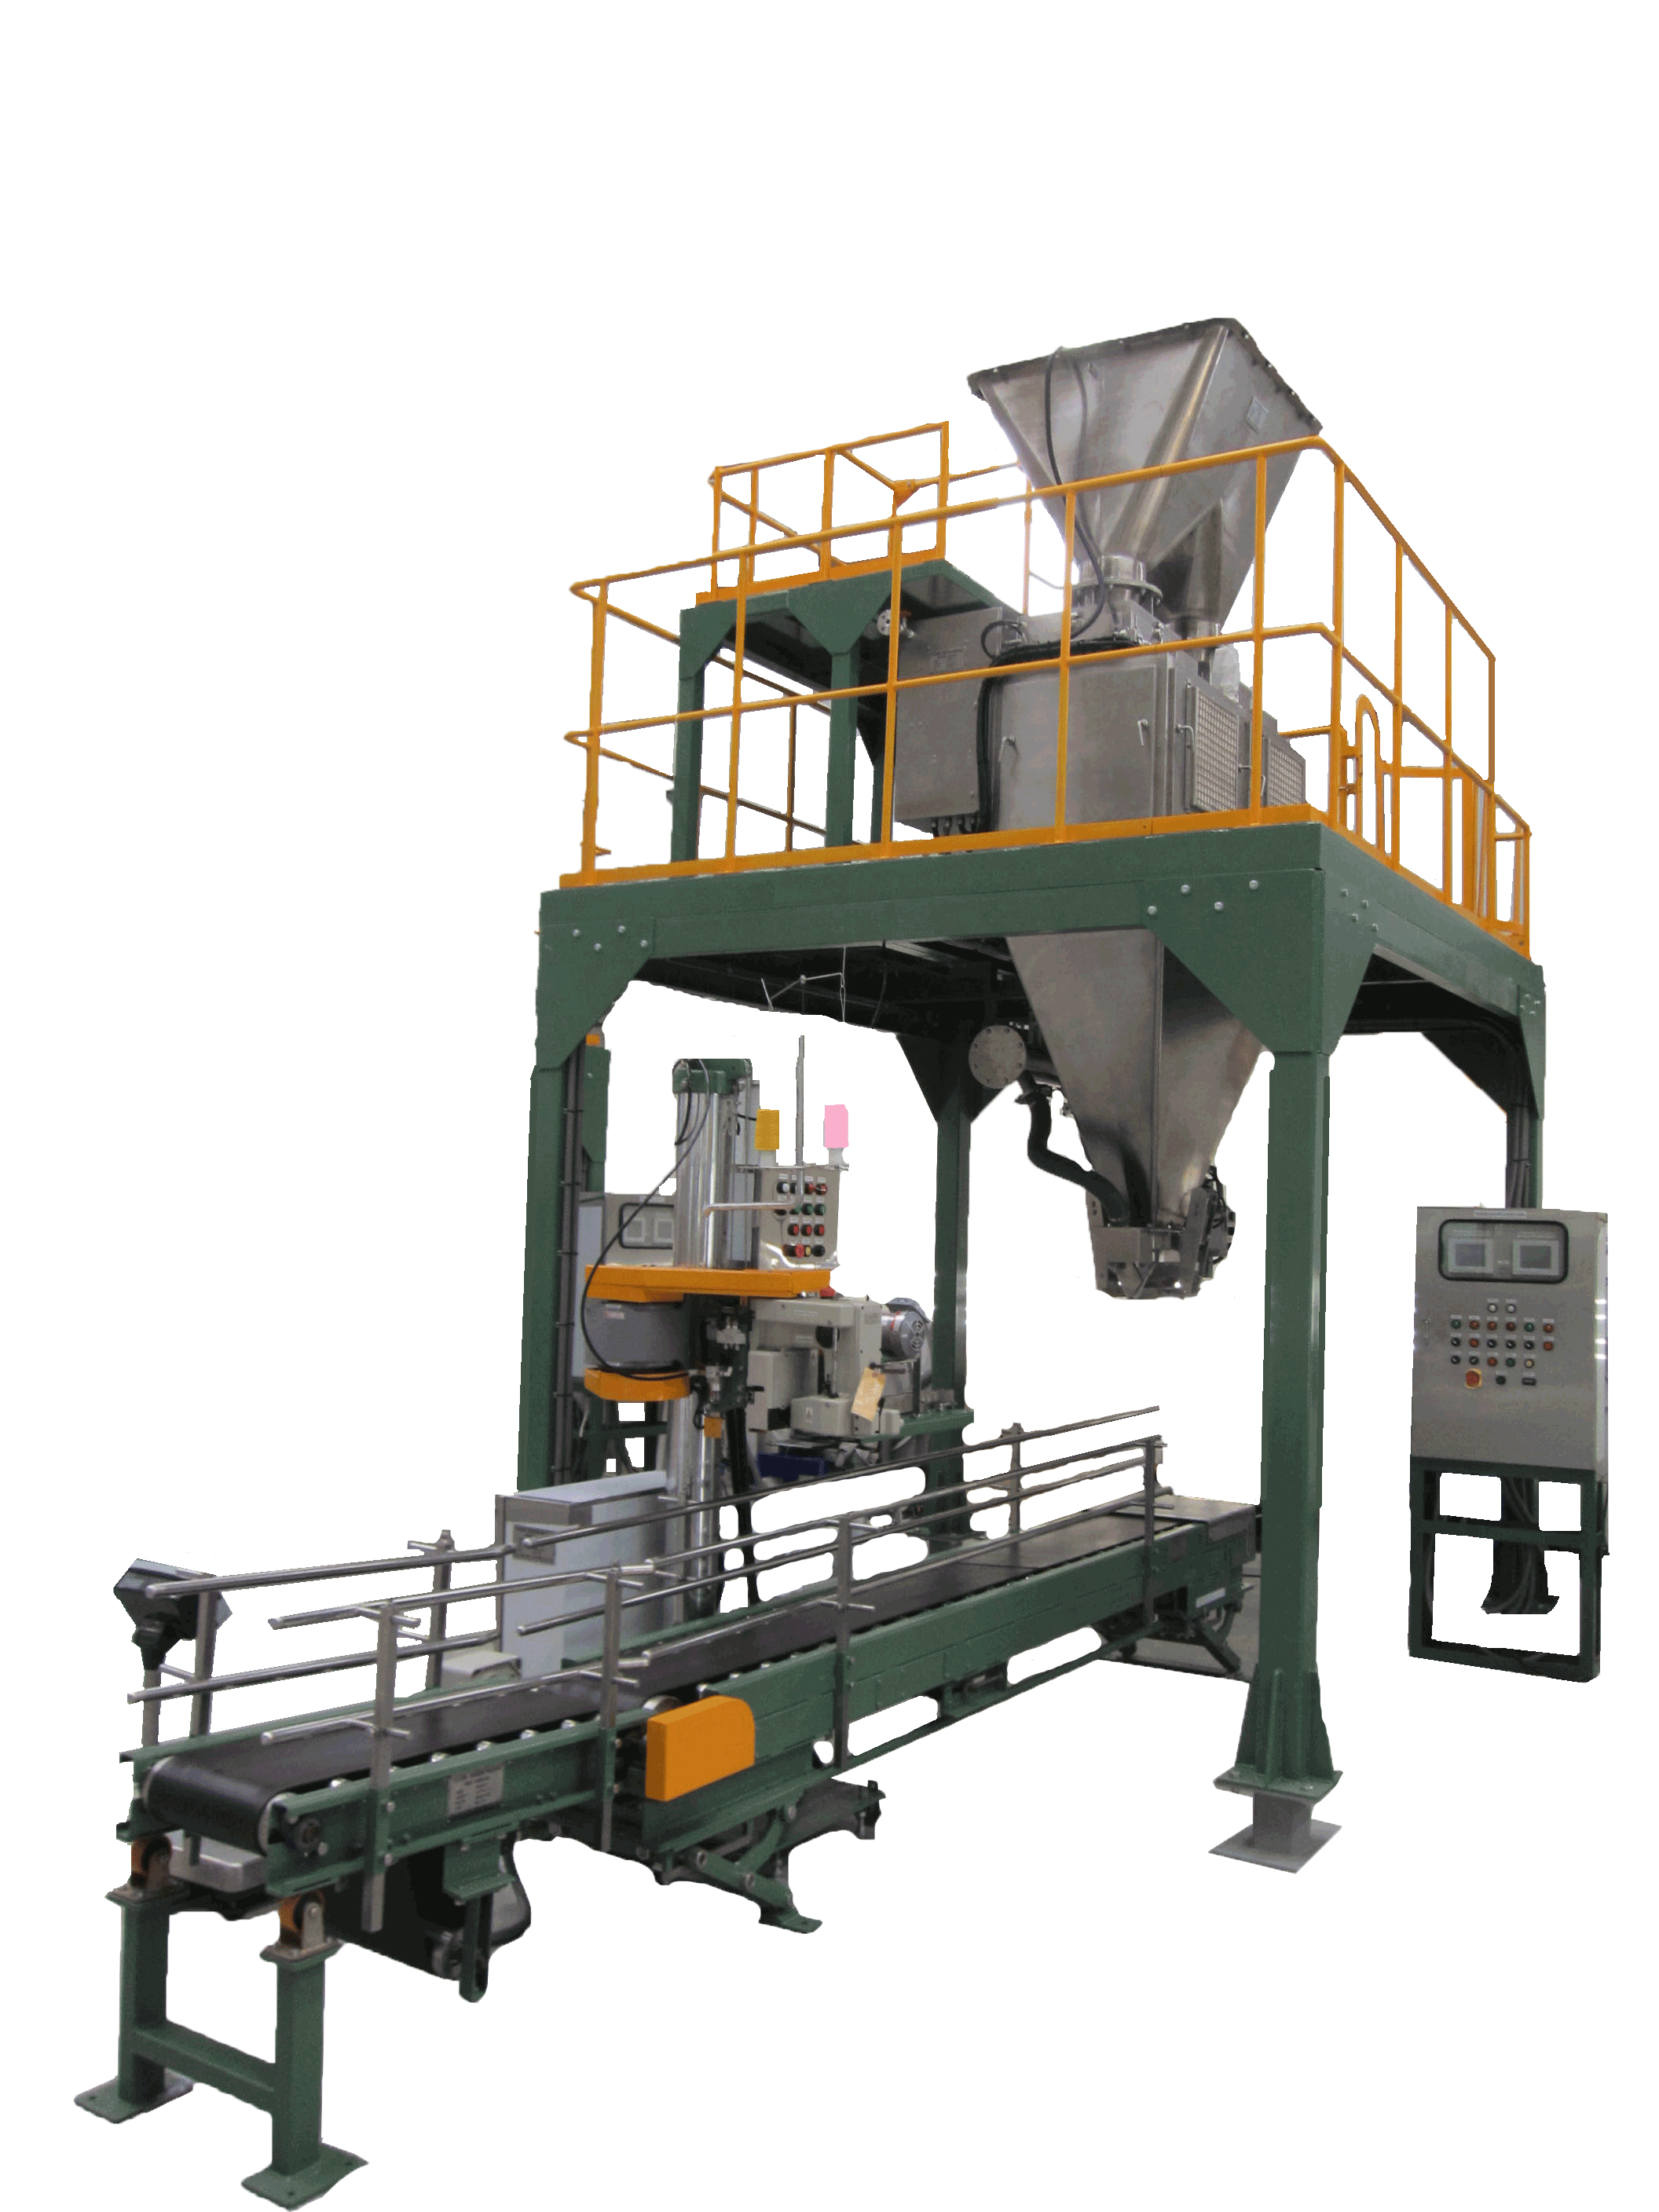 NKT's semi-automatic bagging machine for pellets